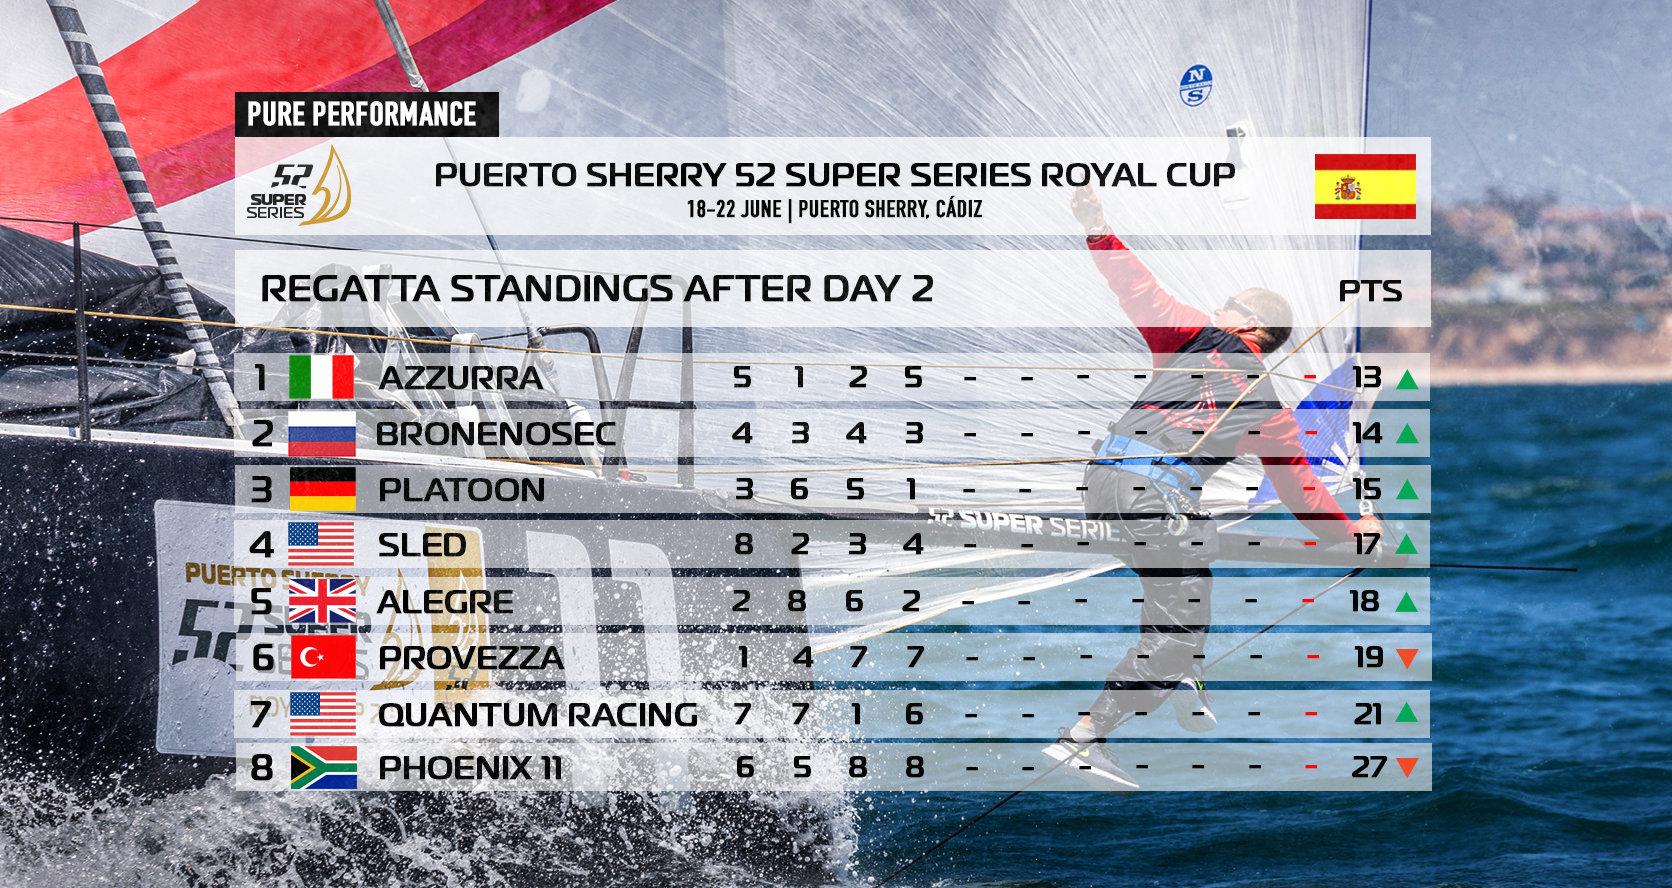 Puerto Sherry 52 SUPER SERIES Royal Cup